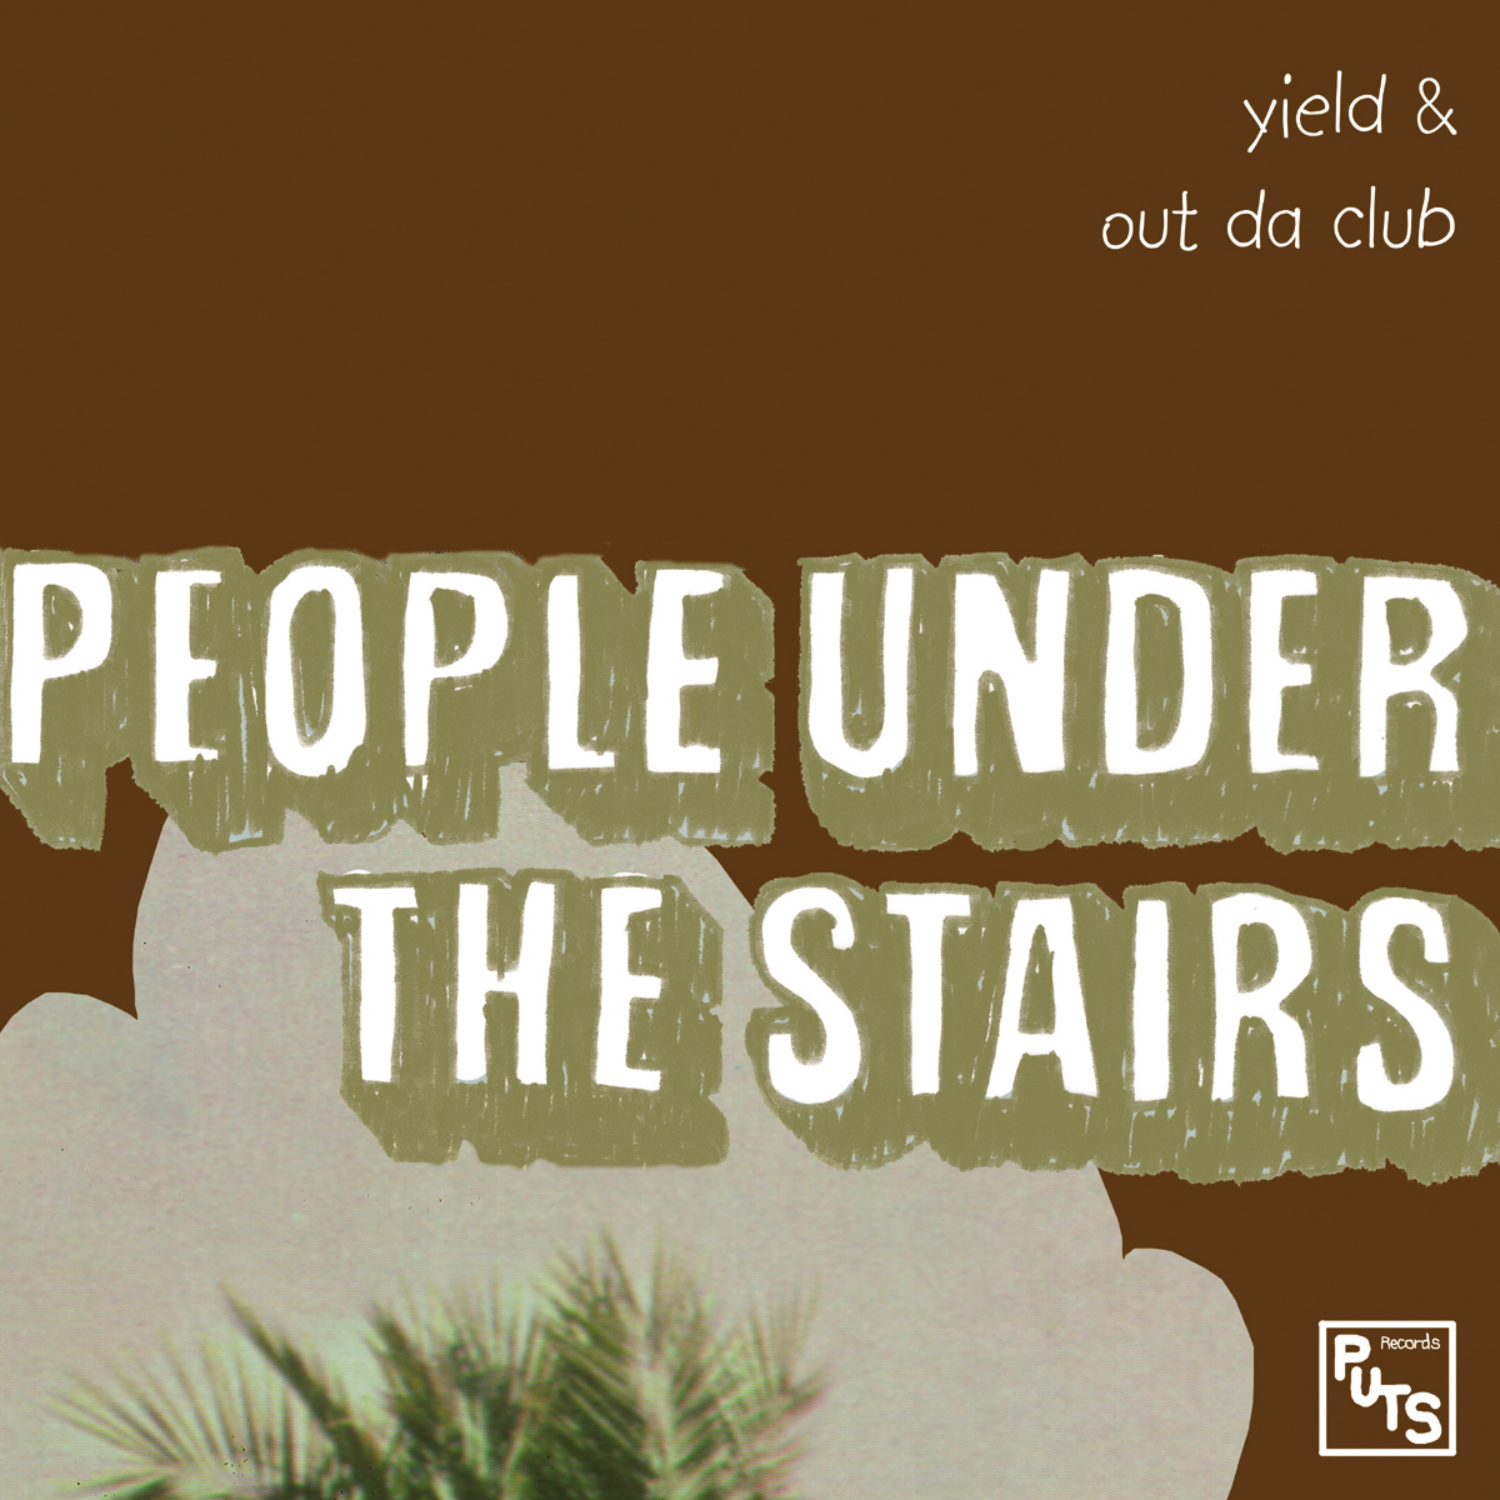 People Under The Stairs - Yield & Out Da Club